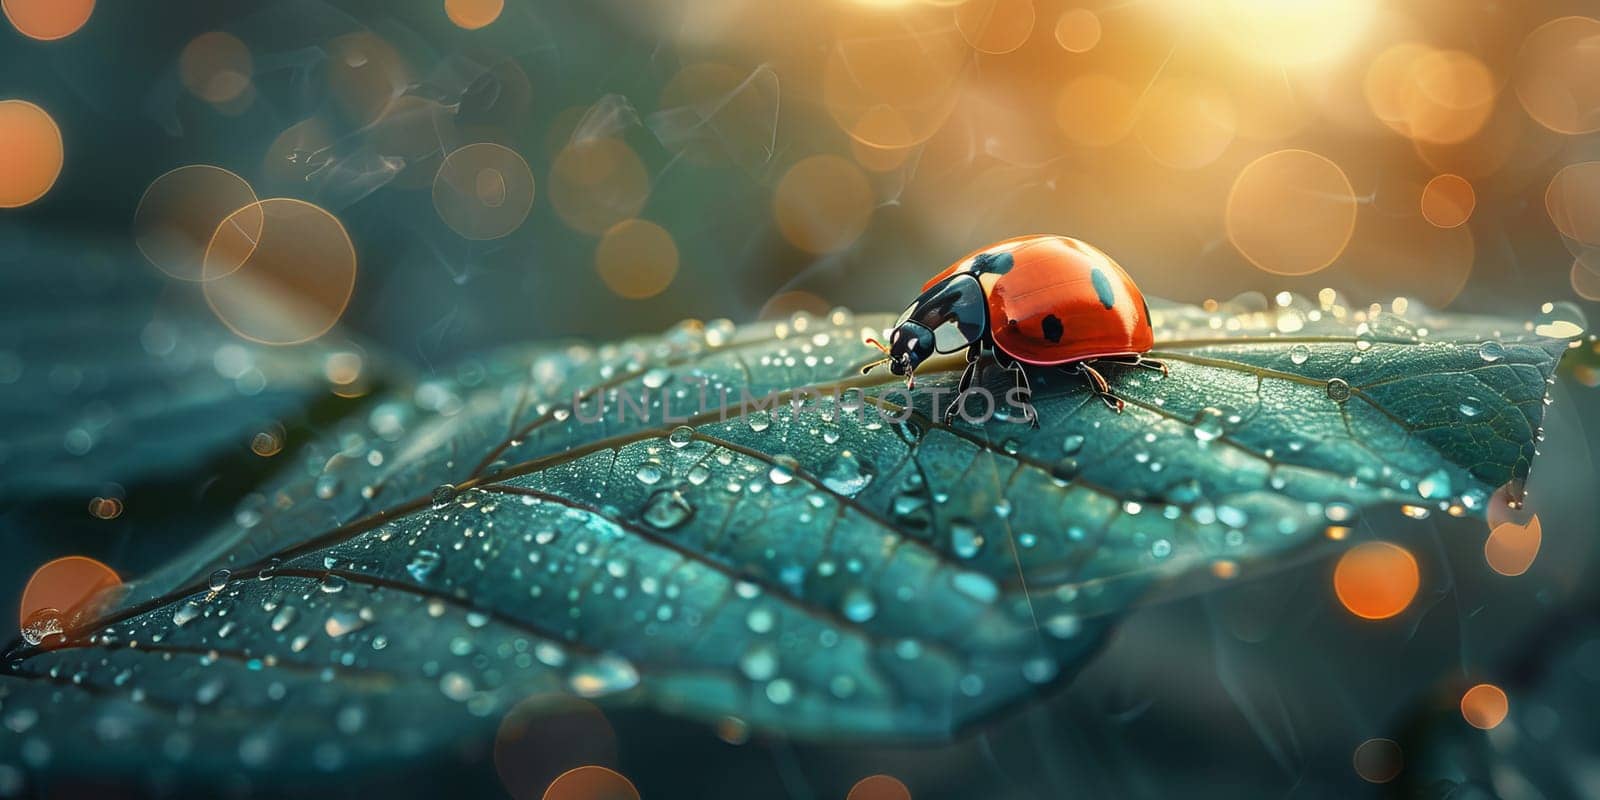 Beautiful ladybug on a green leaf with bokeh background by ailike